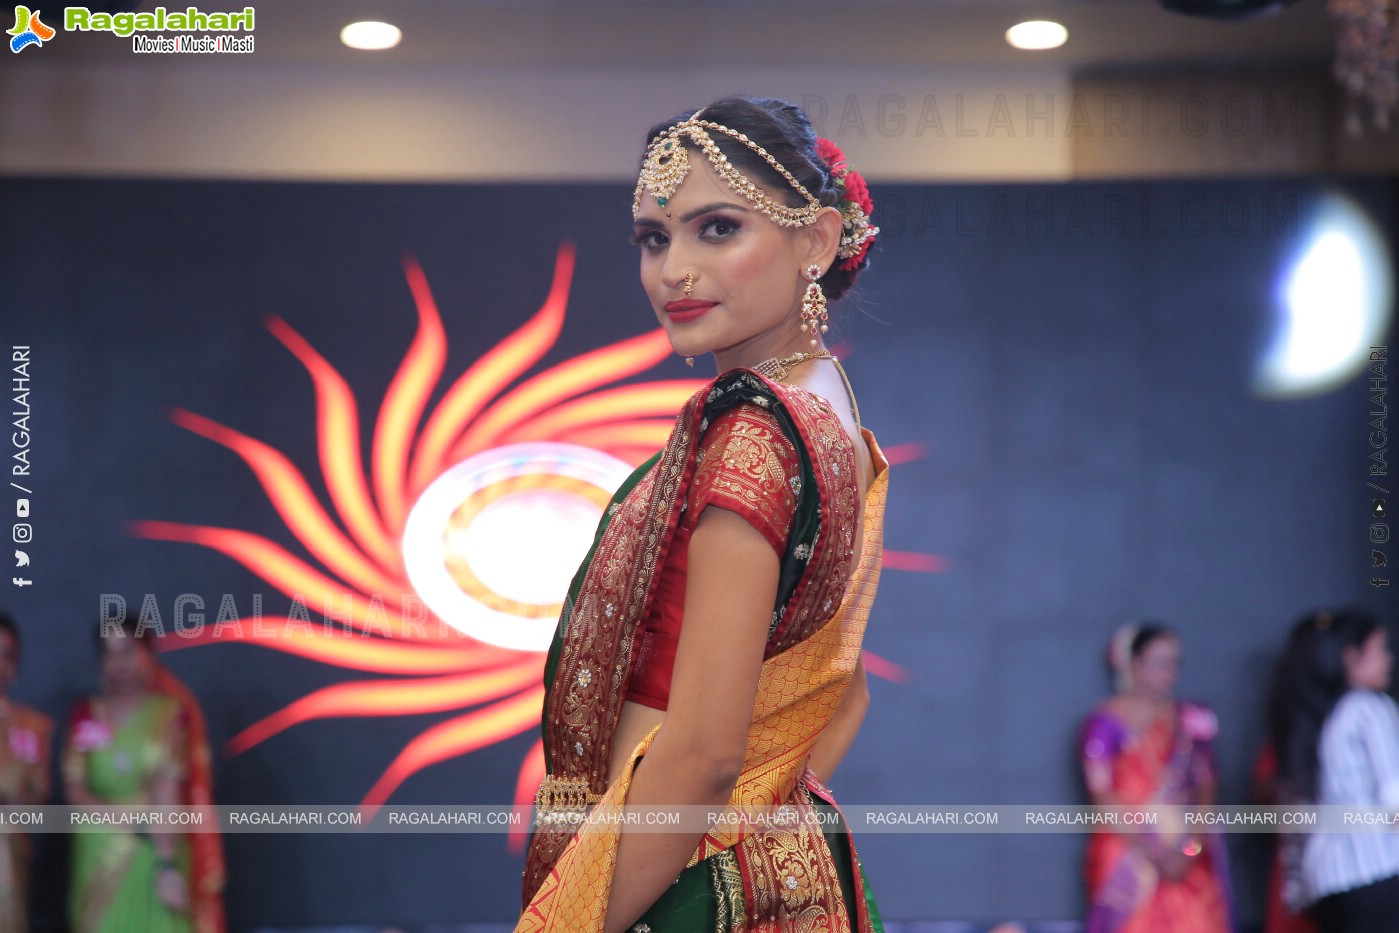 SB Innovations Organises a Bridal Makeup Competition at Hyderabad